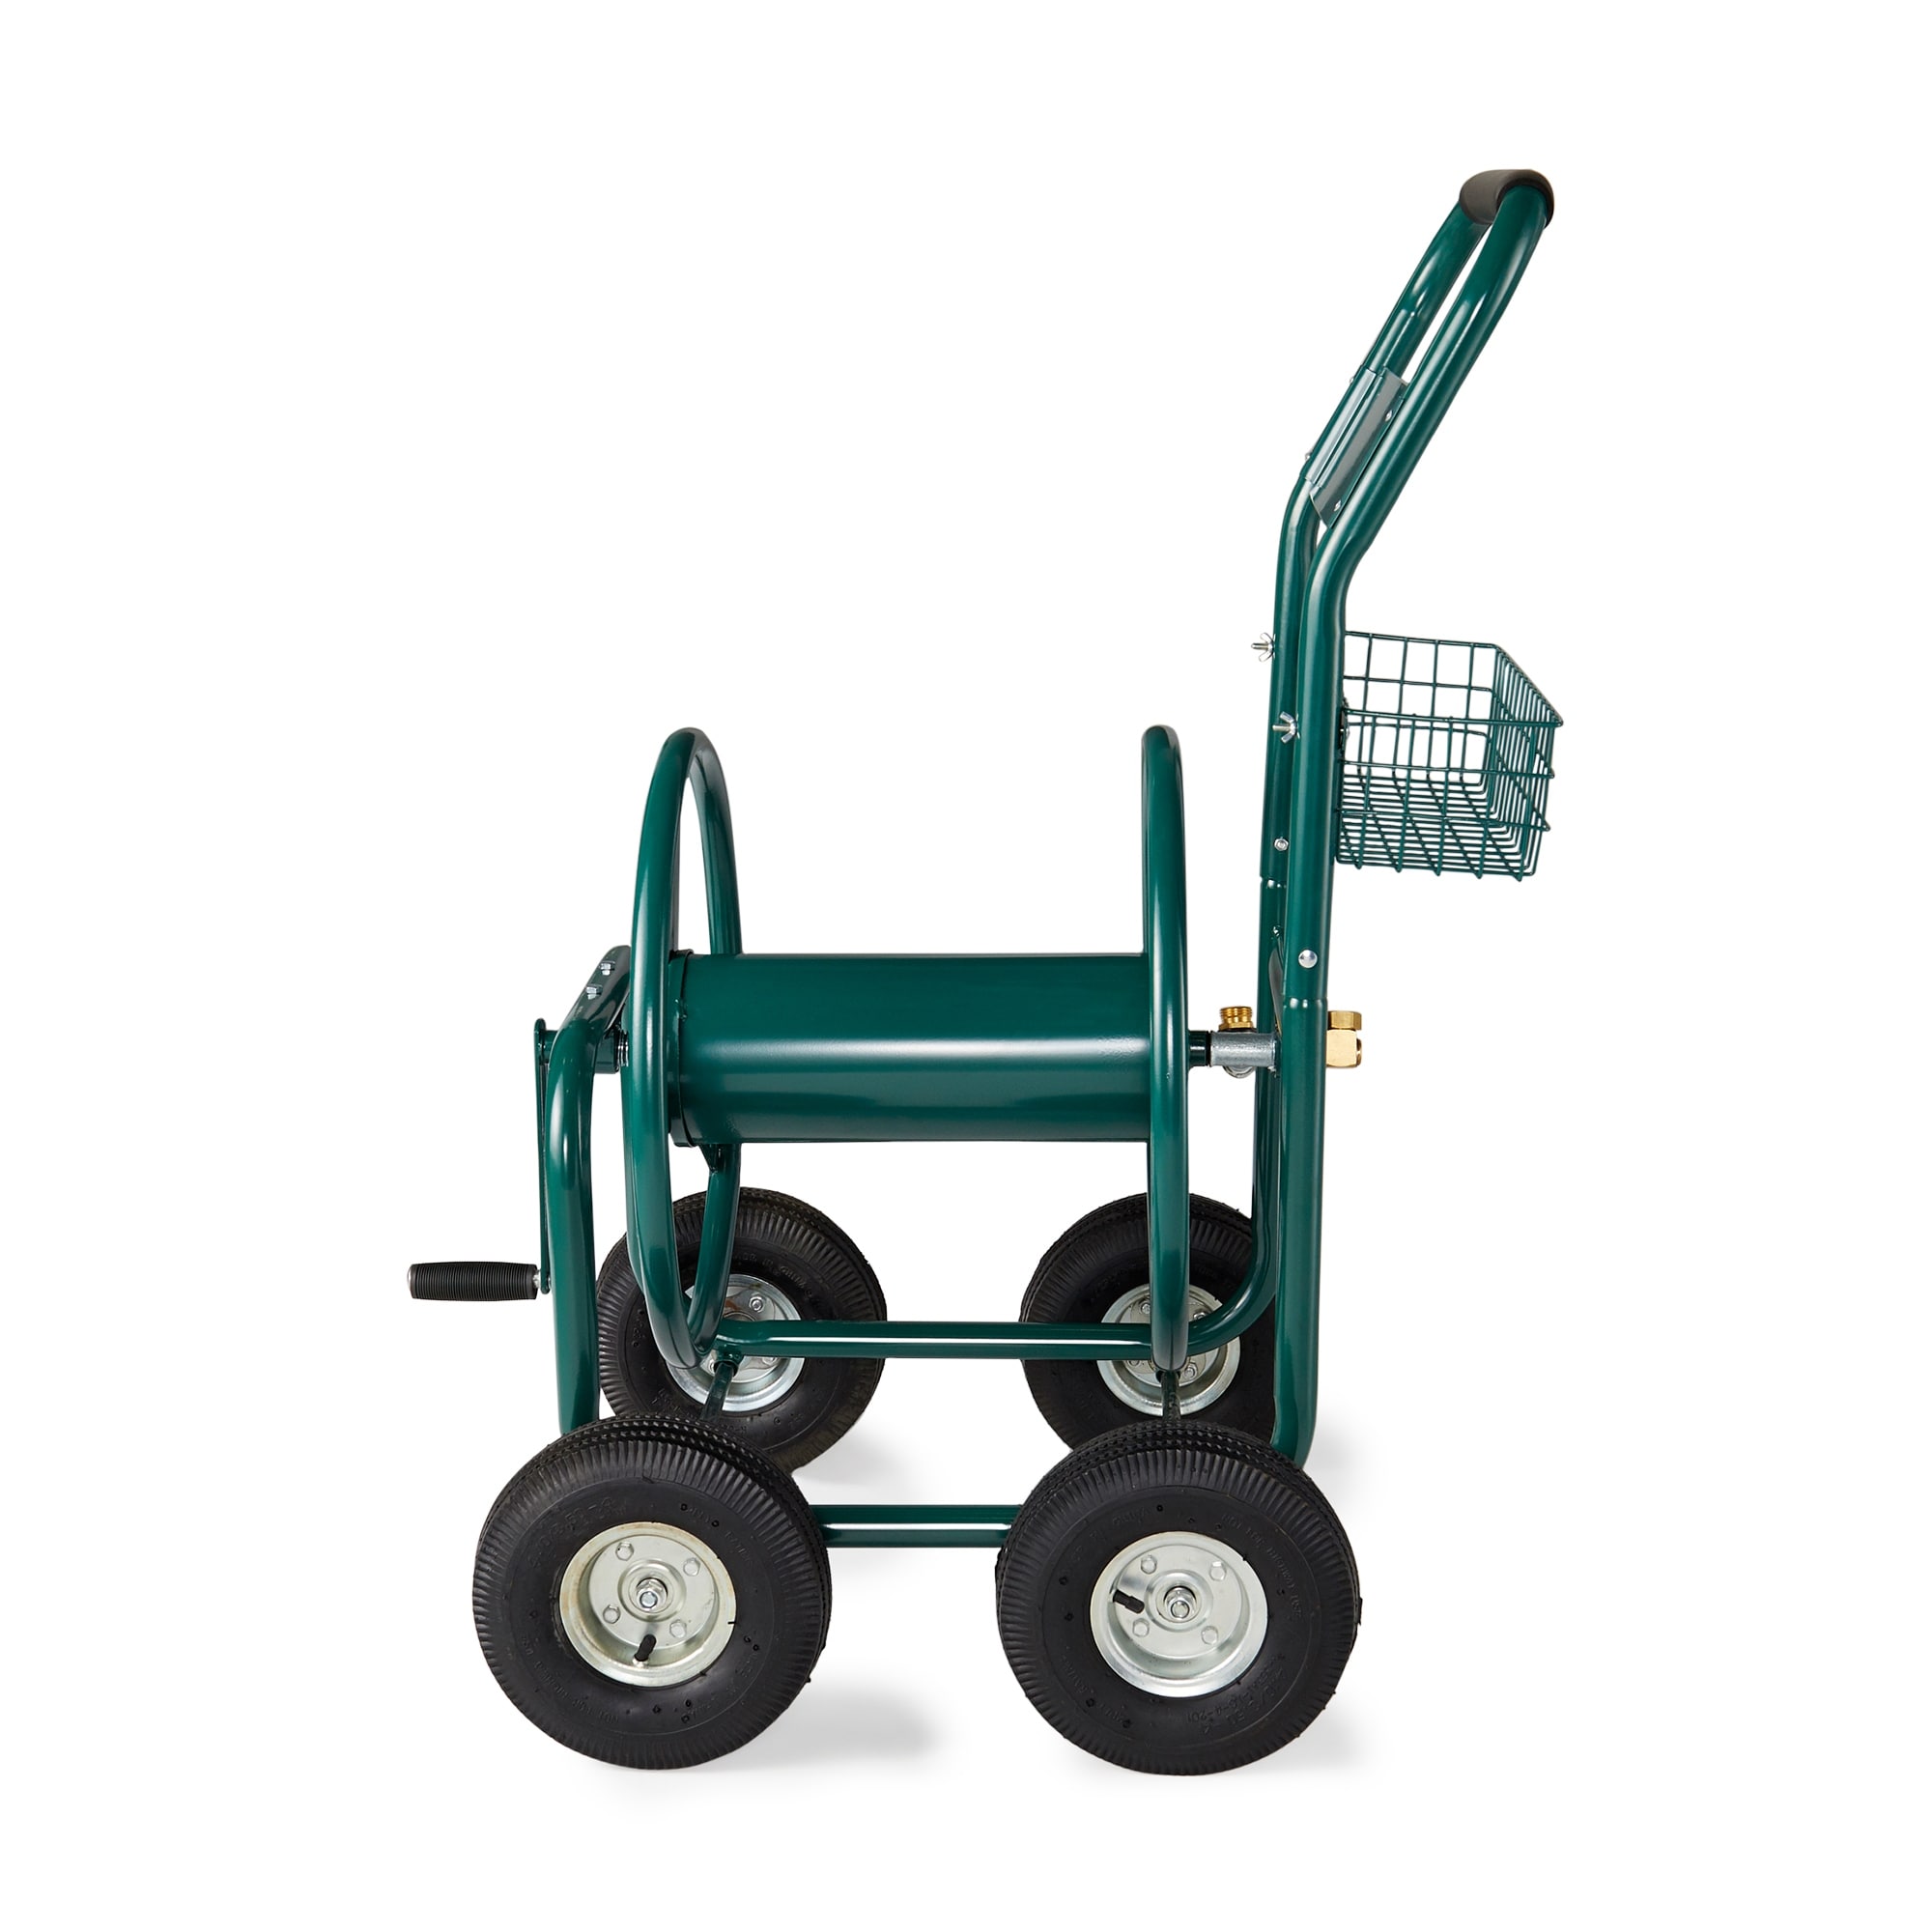 Liberty Garden Products LBG-872-2 4 Wheel Hose Reel Cart Holds up to 350  Feet - 41.7 - Bed Bath & Beyond - 35313185